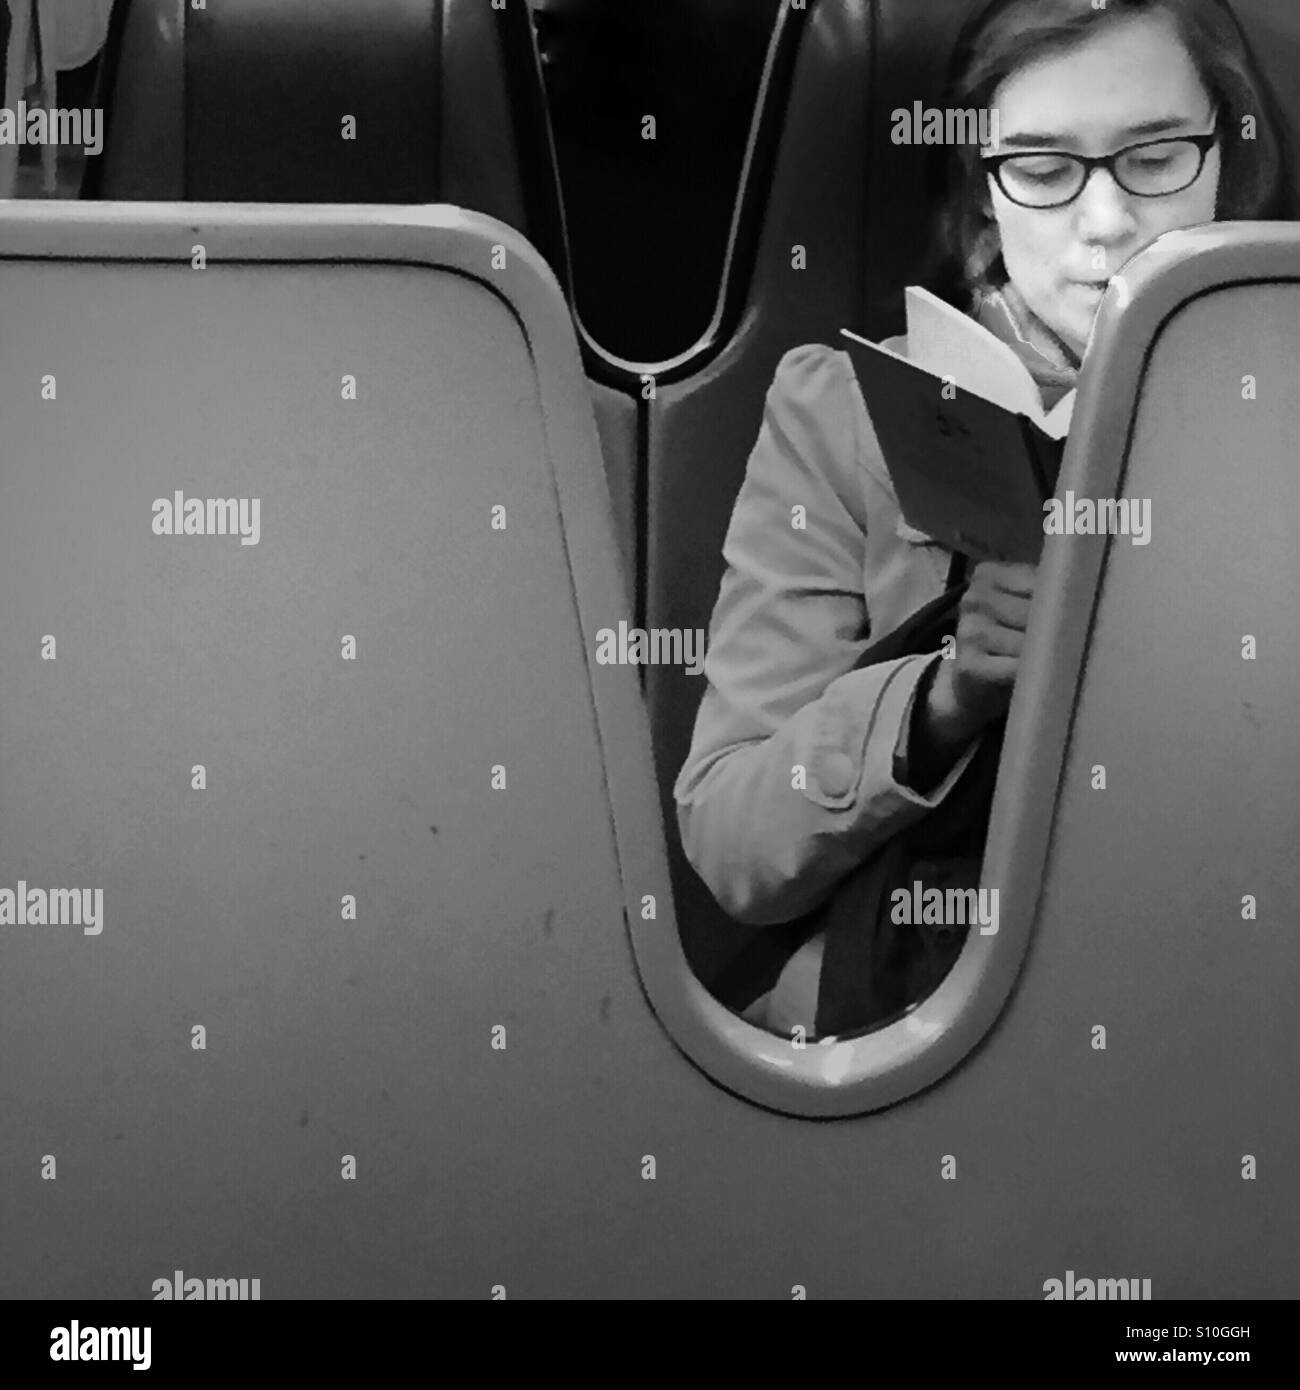 Woman reading a book on the subway Stock Photo